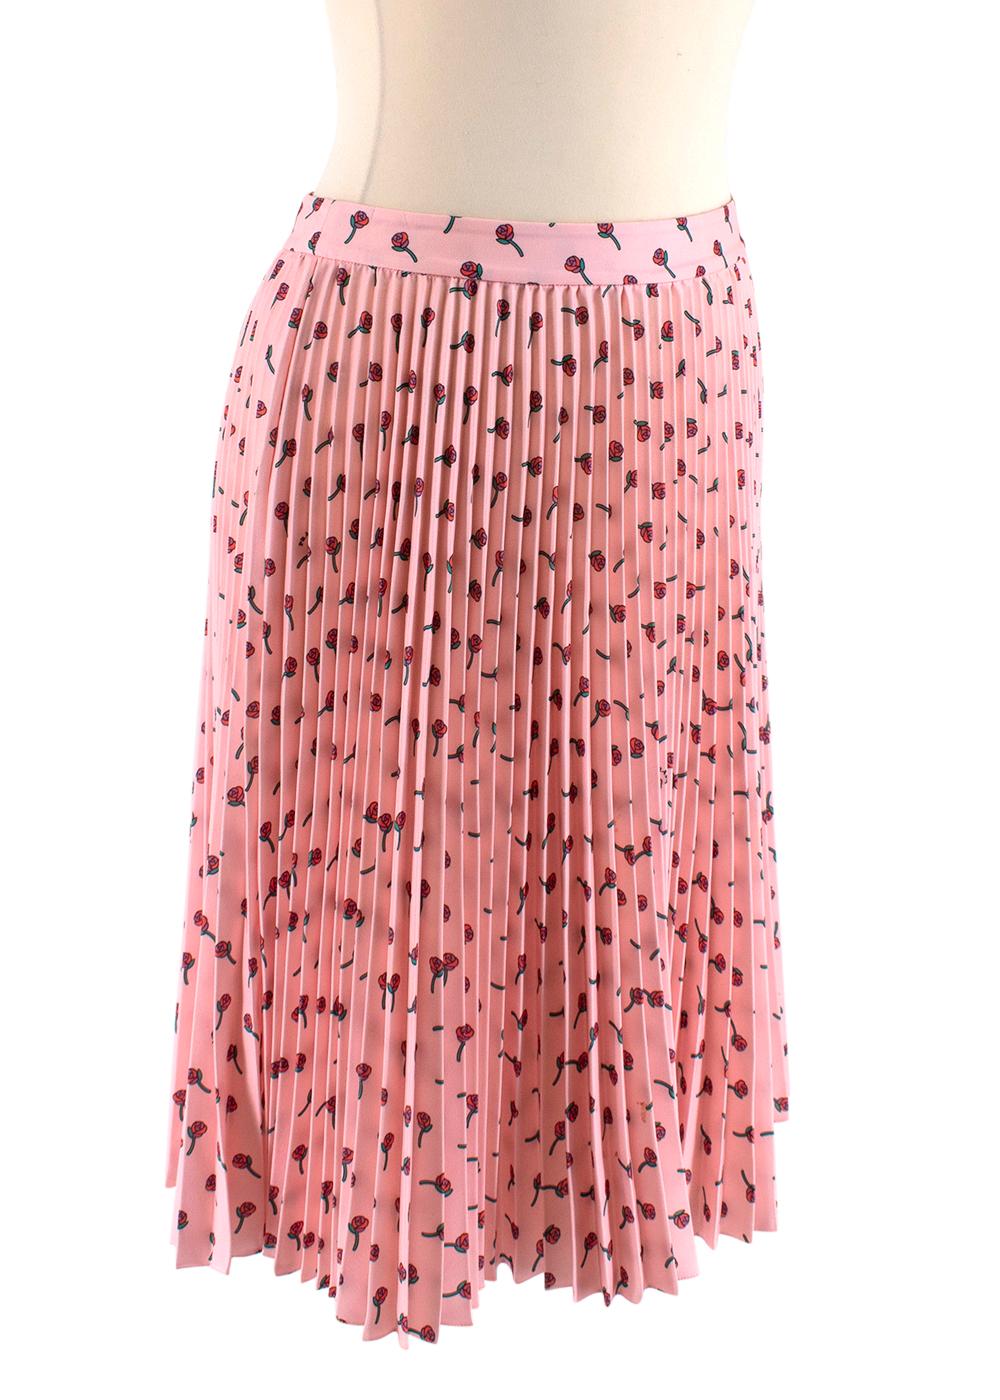 Prada Pink Roses Print Pleated Skirt

- Made of soft satiated crepe 
- Gorgeous roses print 
- Beautiful pink hue 
- Classic cut 
- Zip fastening to the side 
- Pleated surface 
- Elegant versatile design 

Materials:
100% polyester 

Dry clean only